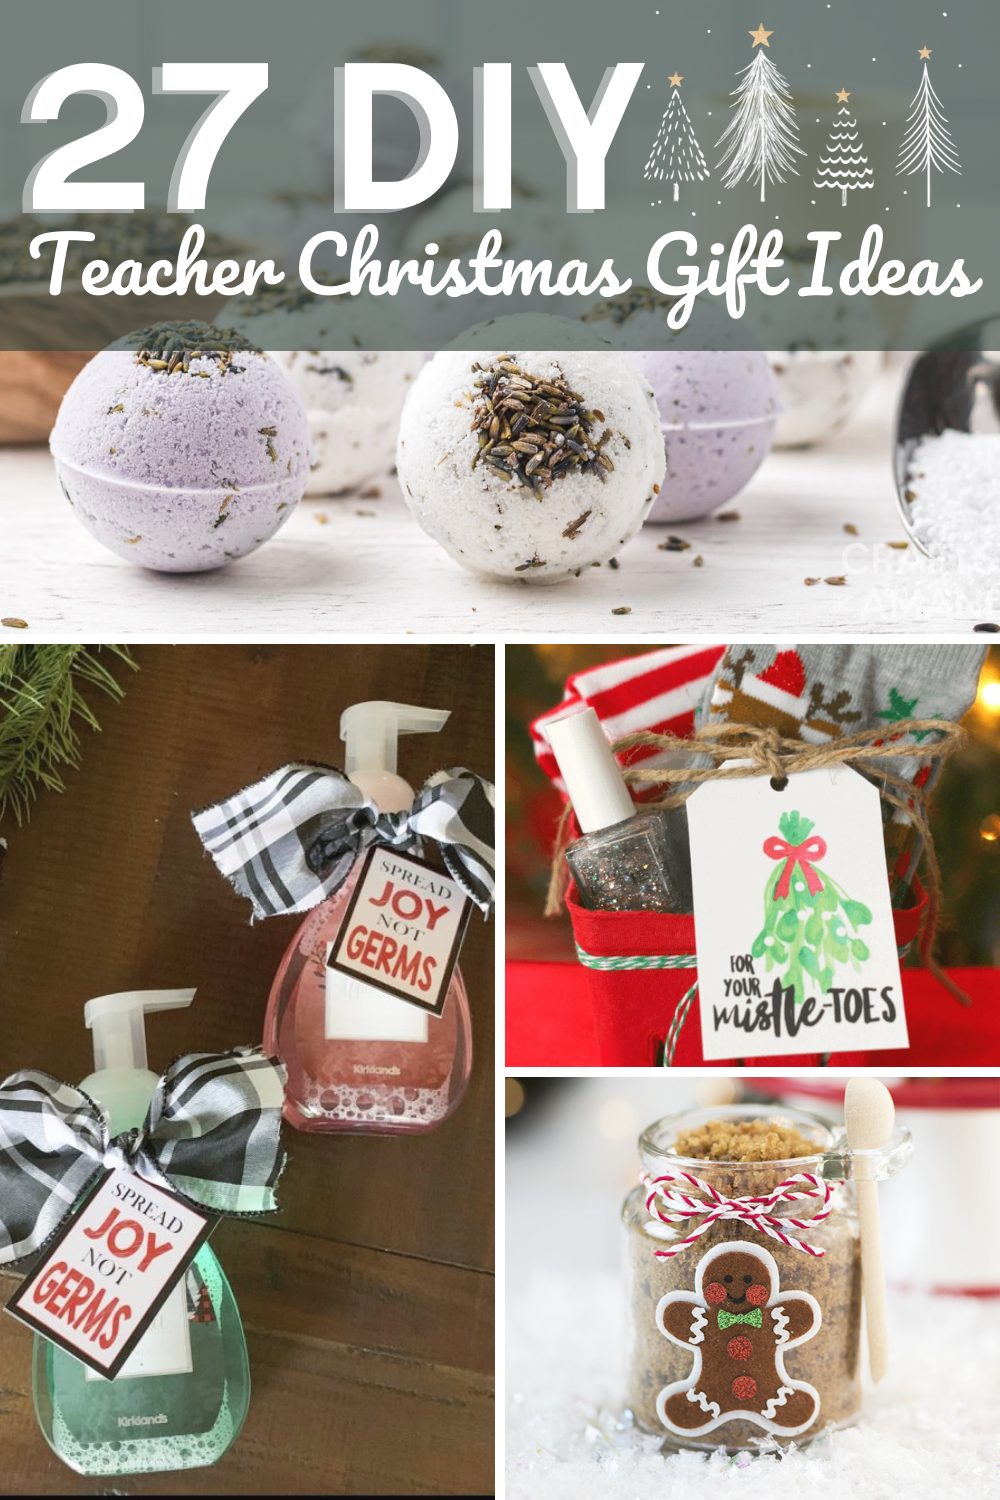 Pinterest Fab 4: DIY Gifts for the Season | The Blinds.com Blog